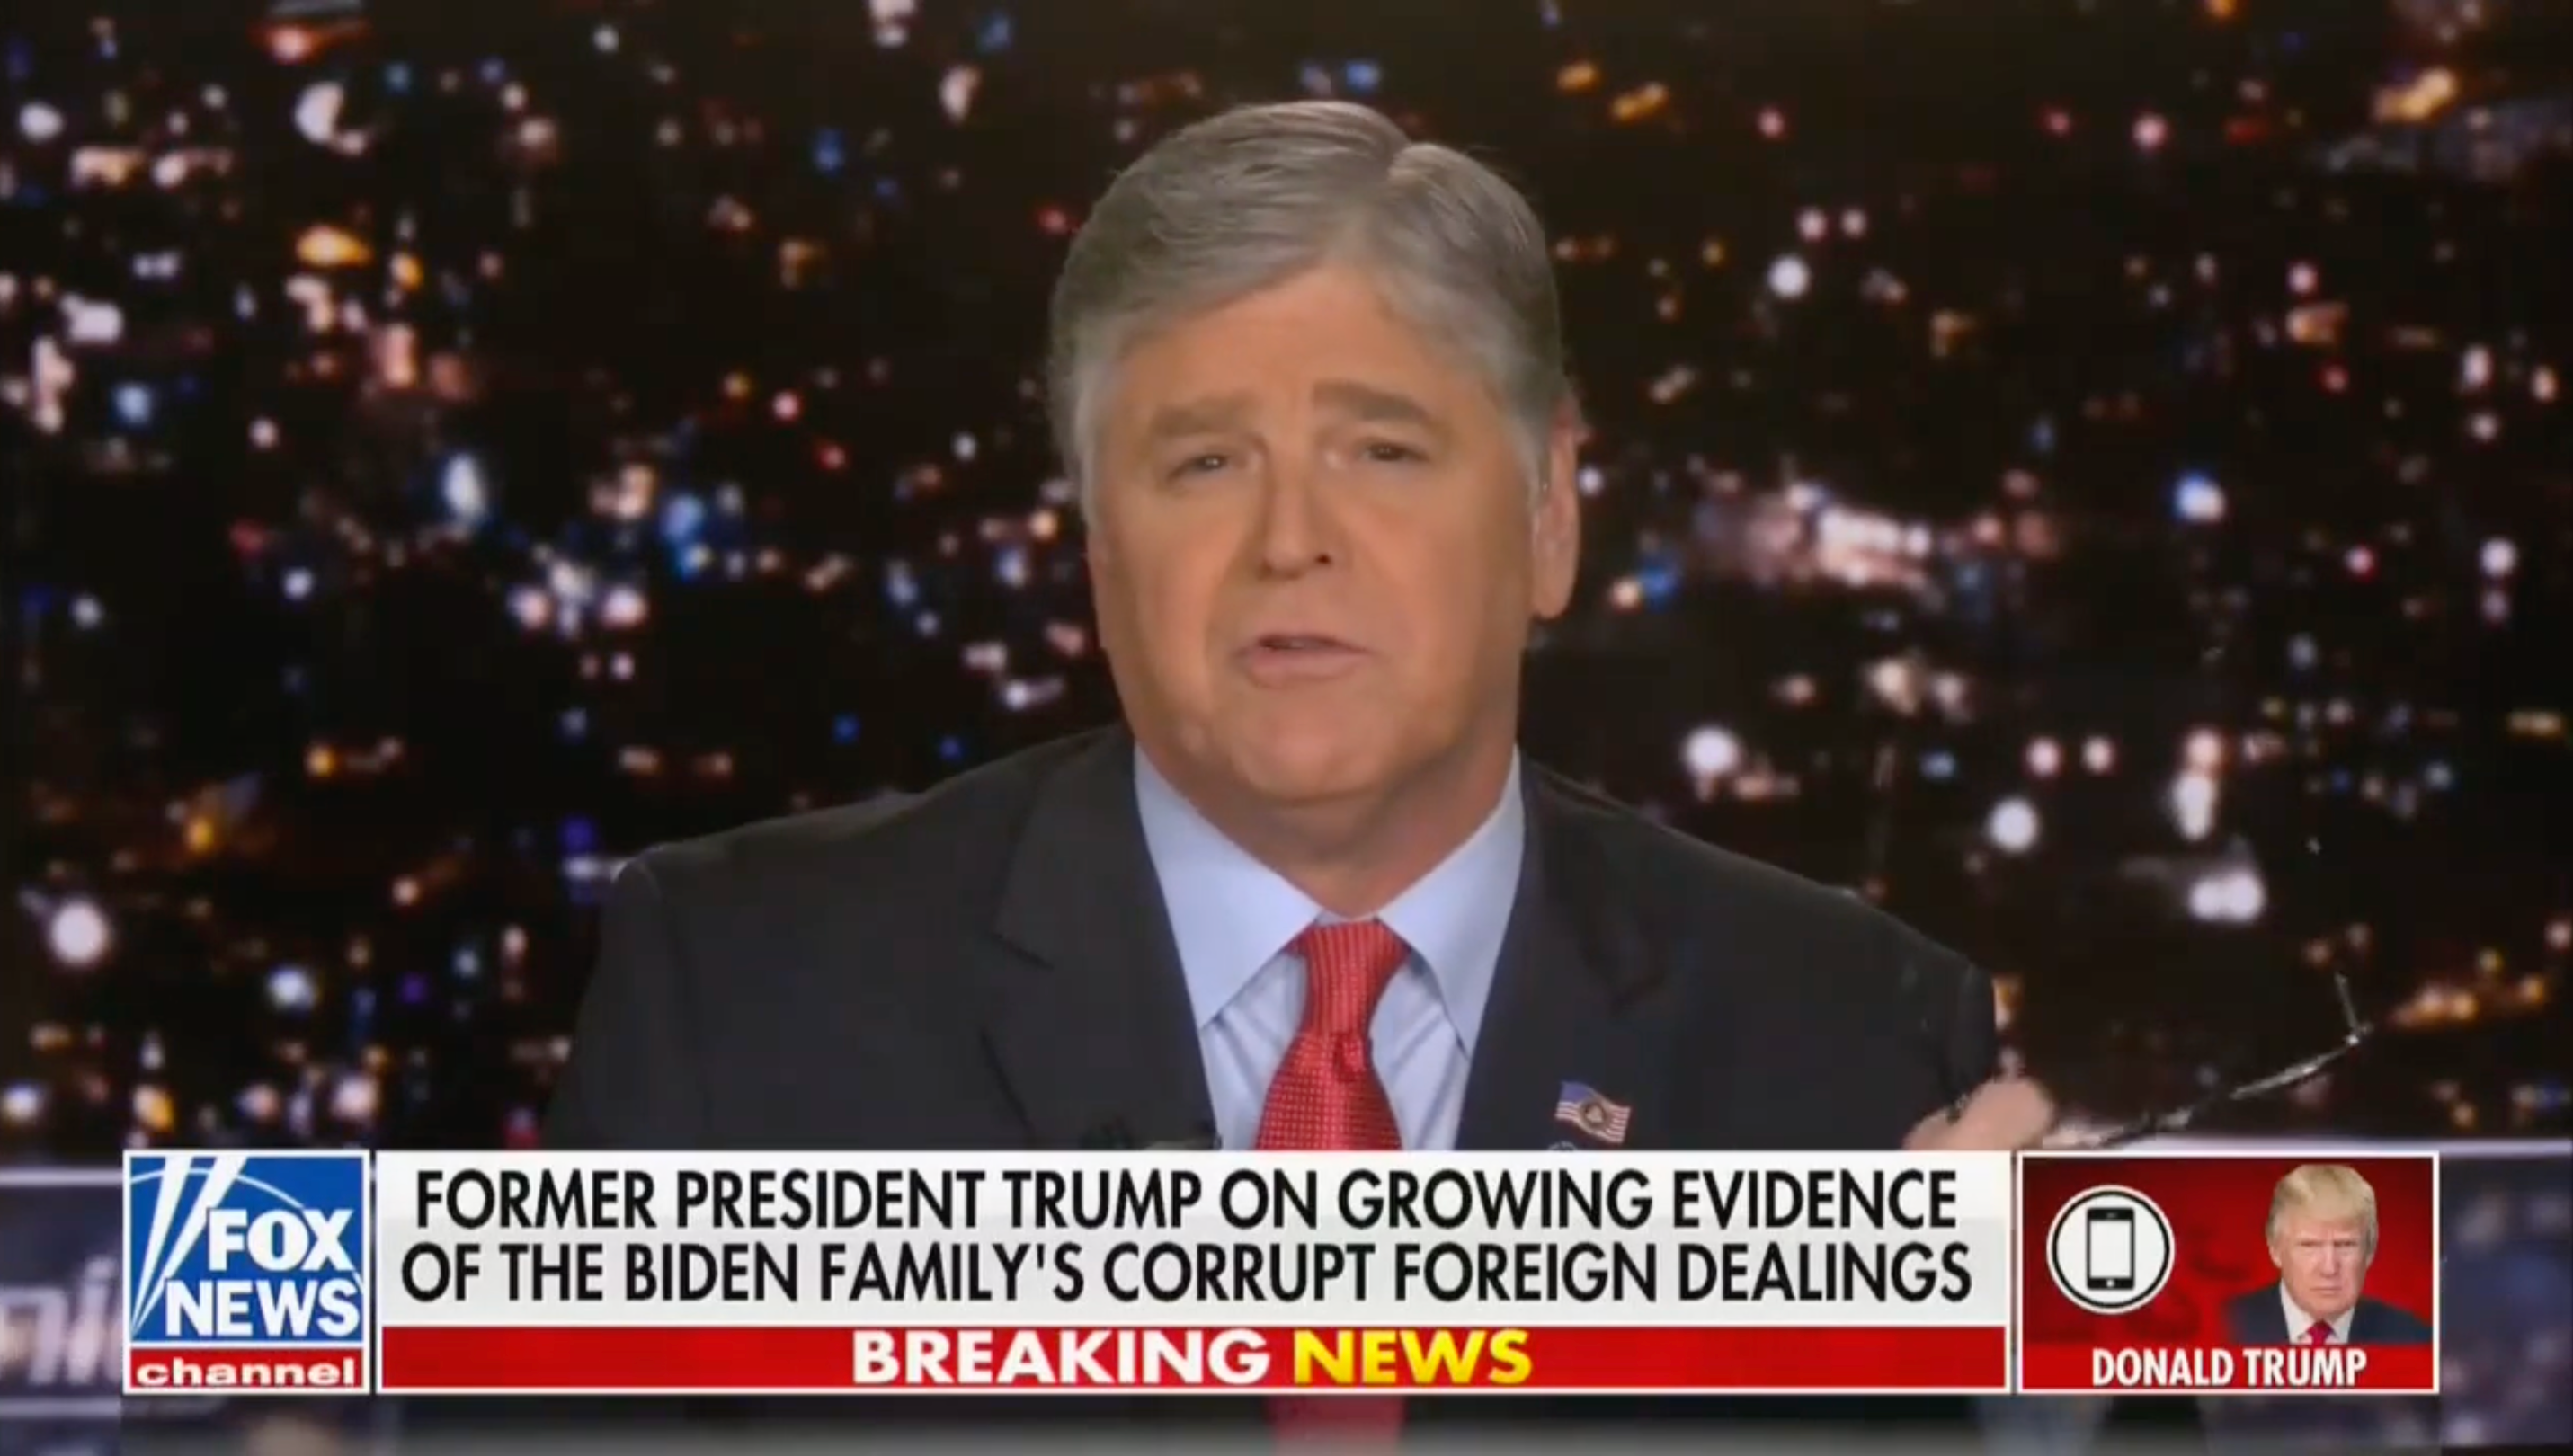 Trump and Hannity discussed Hunter Biden which allowed Trump to reignite his feud with Chris Wallace, a colleague on Fox News